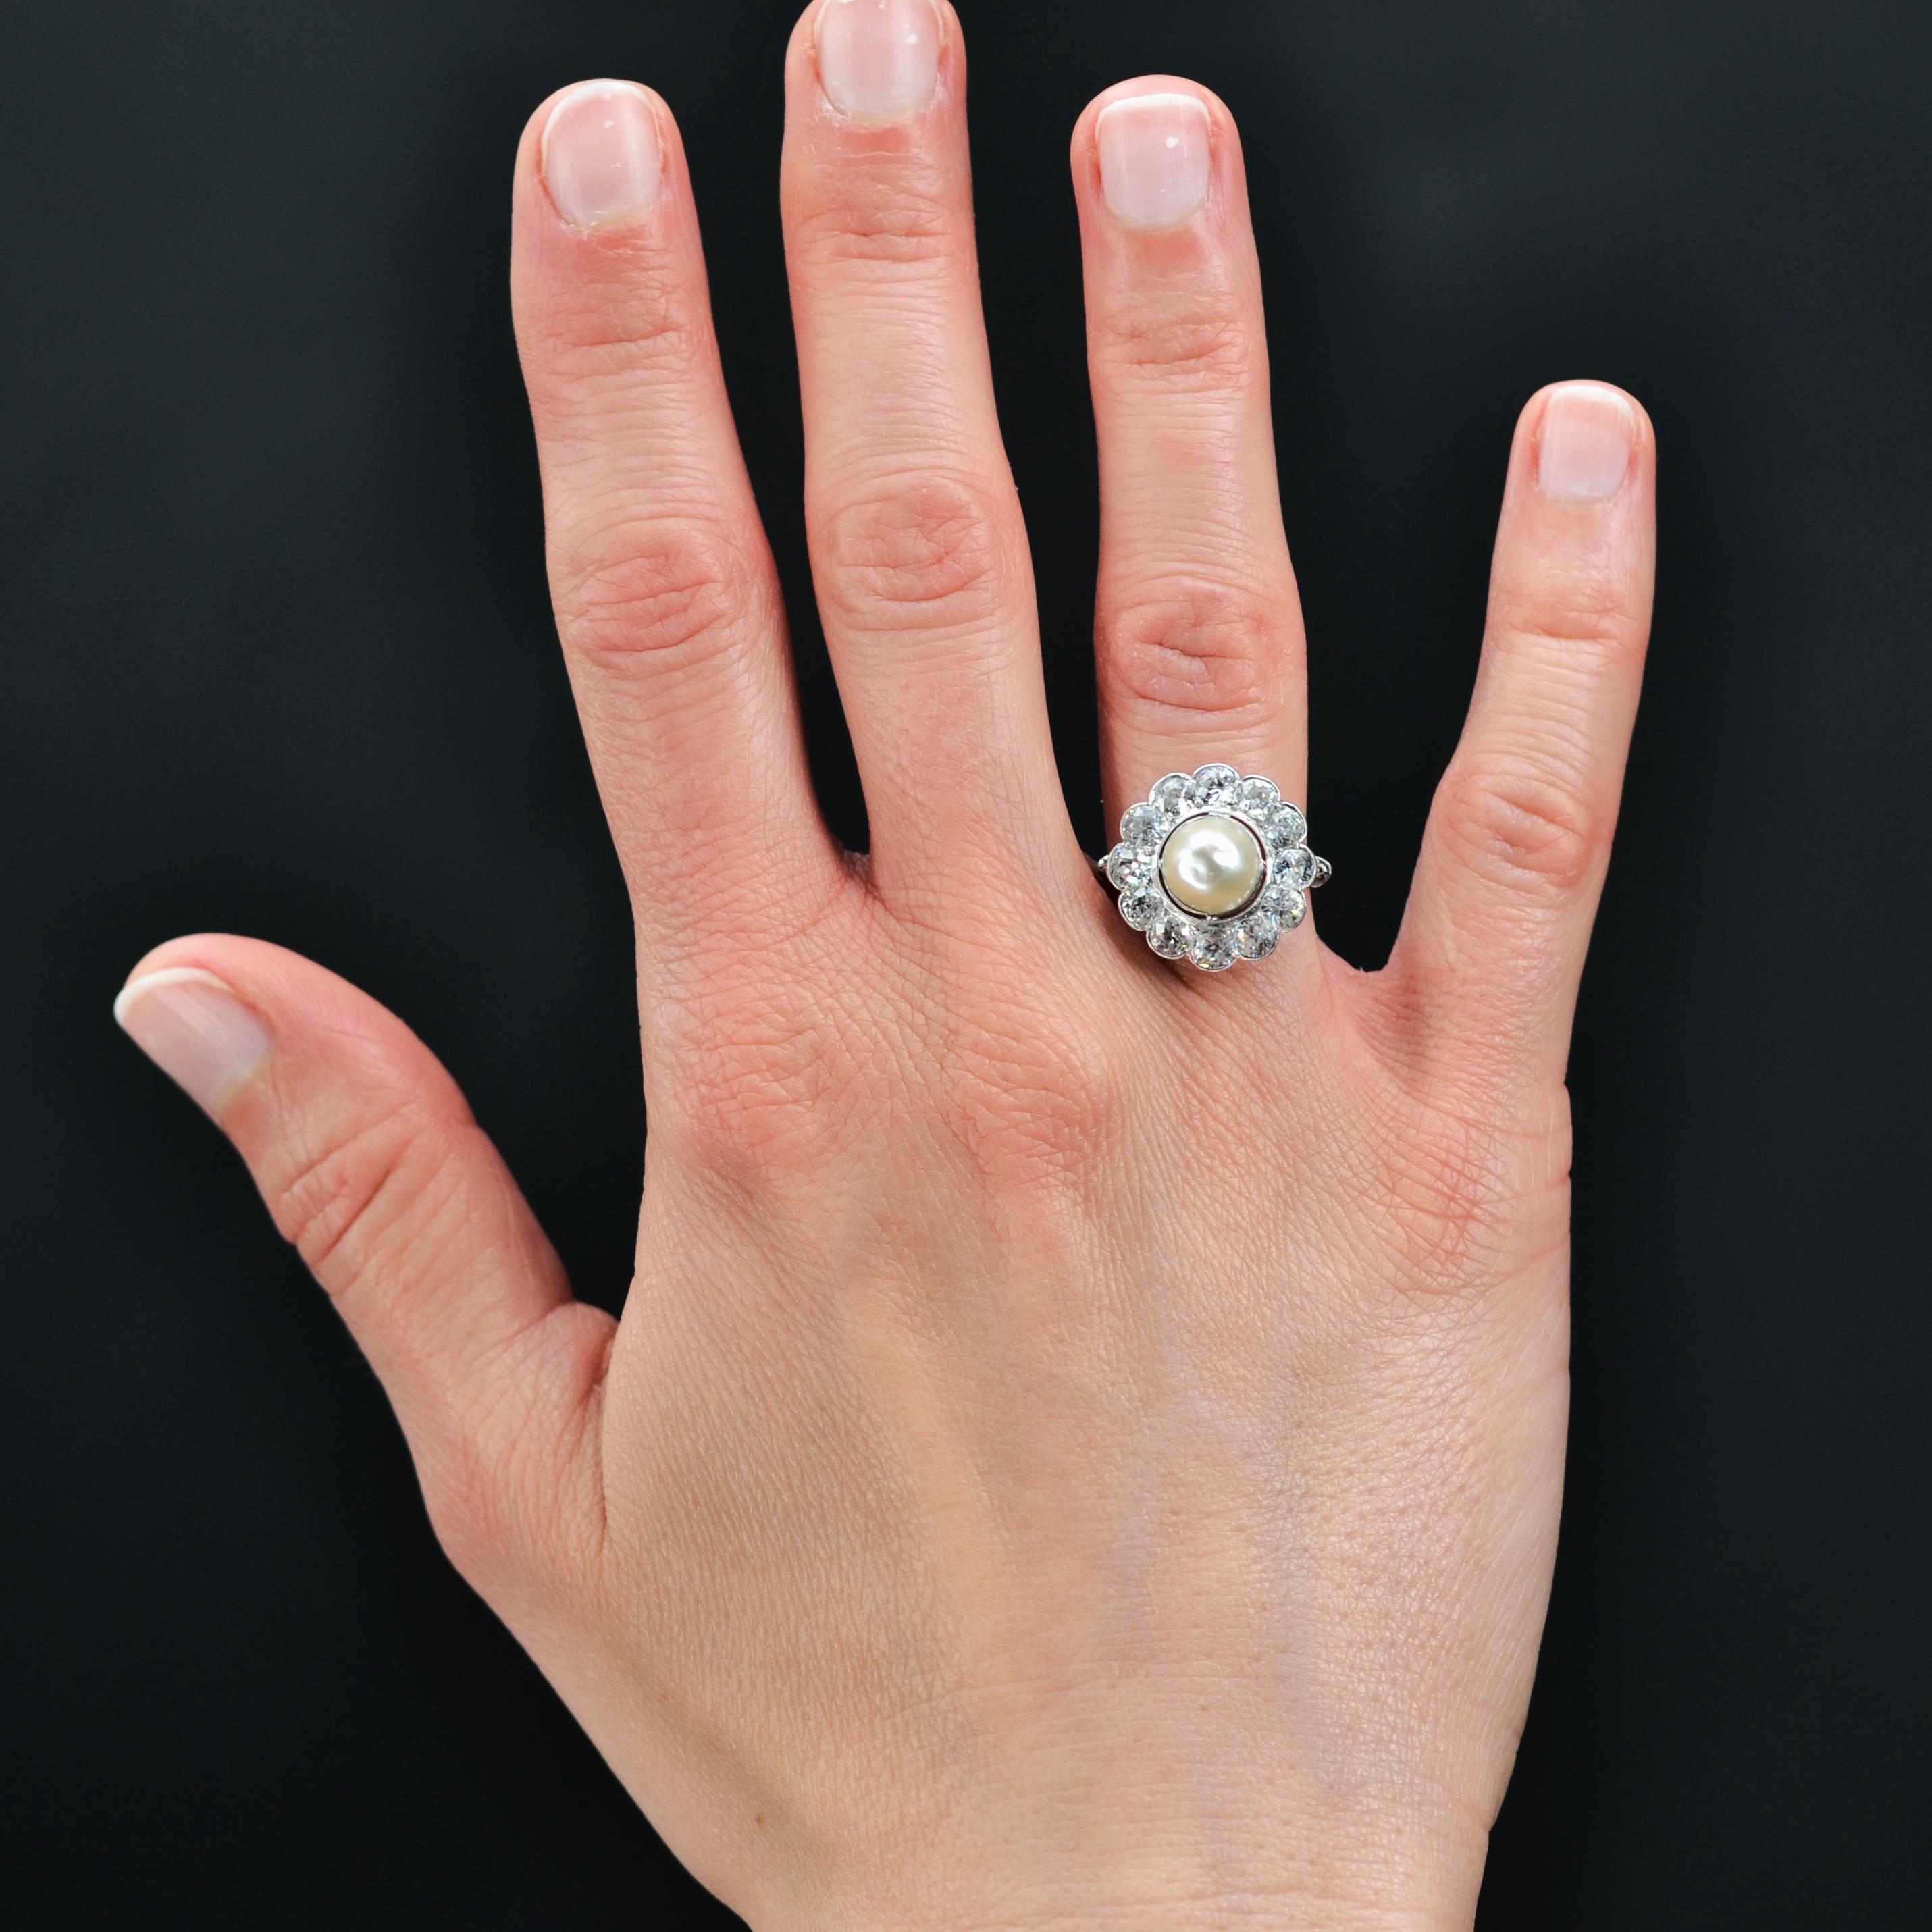 Ring in 18 karat white gold, owl hallmark and platinum, mascaron hallmark.
Of round shape, this splendid daisy ring is decorated on its top of a natural pearl certified by the French laboratory of gemmology, slightly baroque cream pearly orient. The